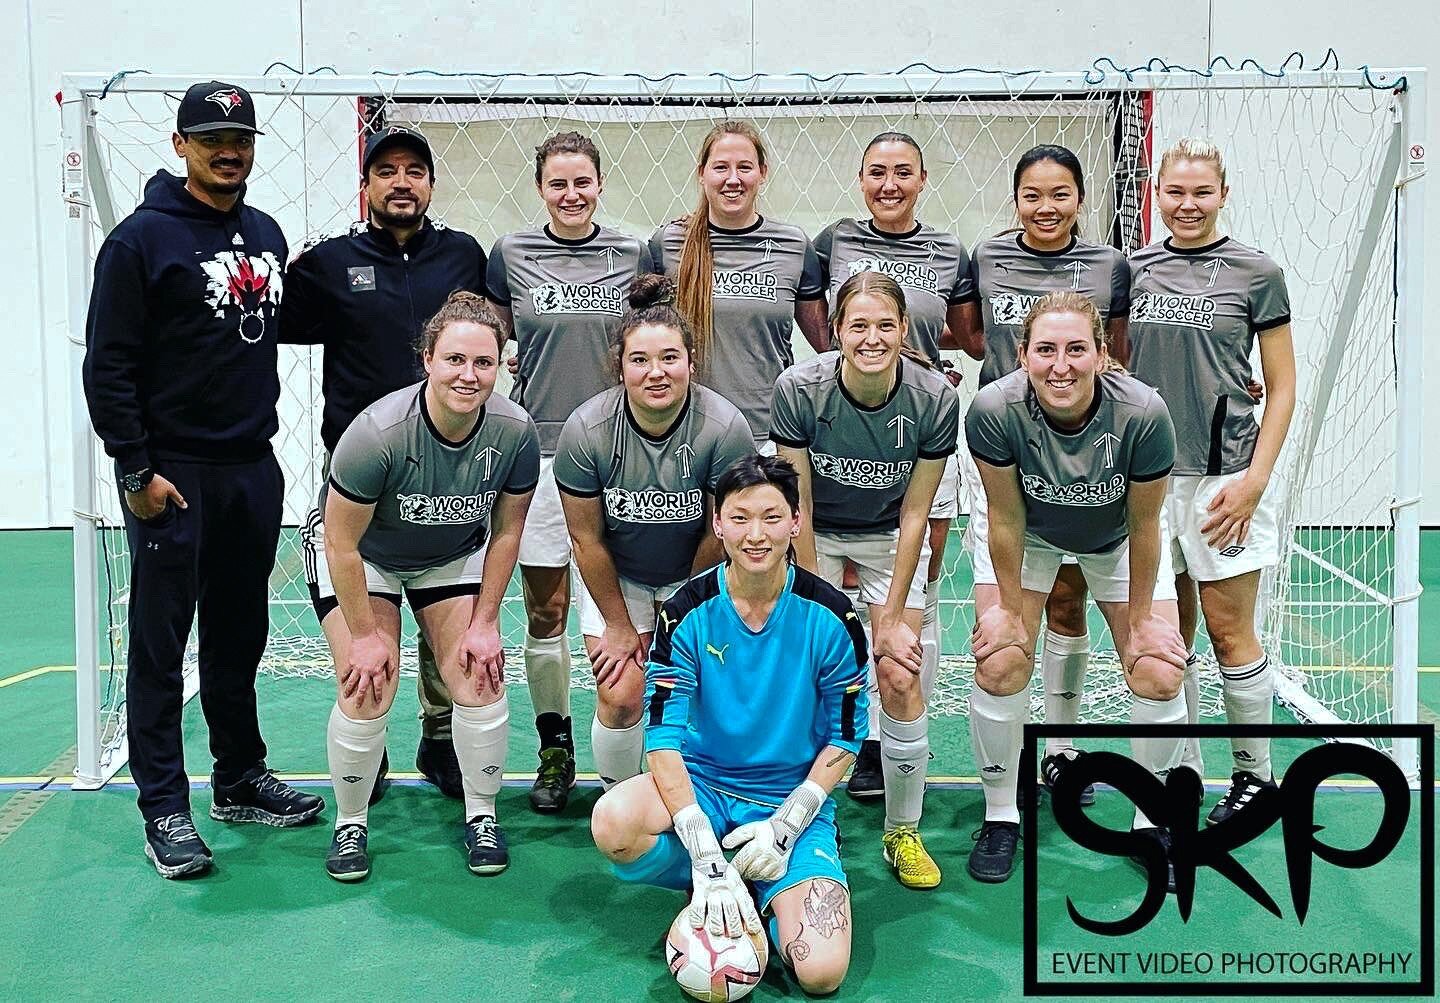 ANNOUNCMENT ❗

We have partnered up with @worldofsocceryyc &amp; @calgaryunitedsa to have our FIRST EVER women Futsal team.

We have already got the season off to a very competitive with a 16-1 victory and narrow defeat to @sait_trojans 4-3.

Help us